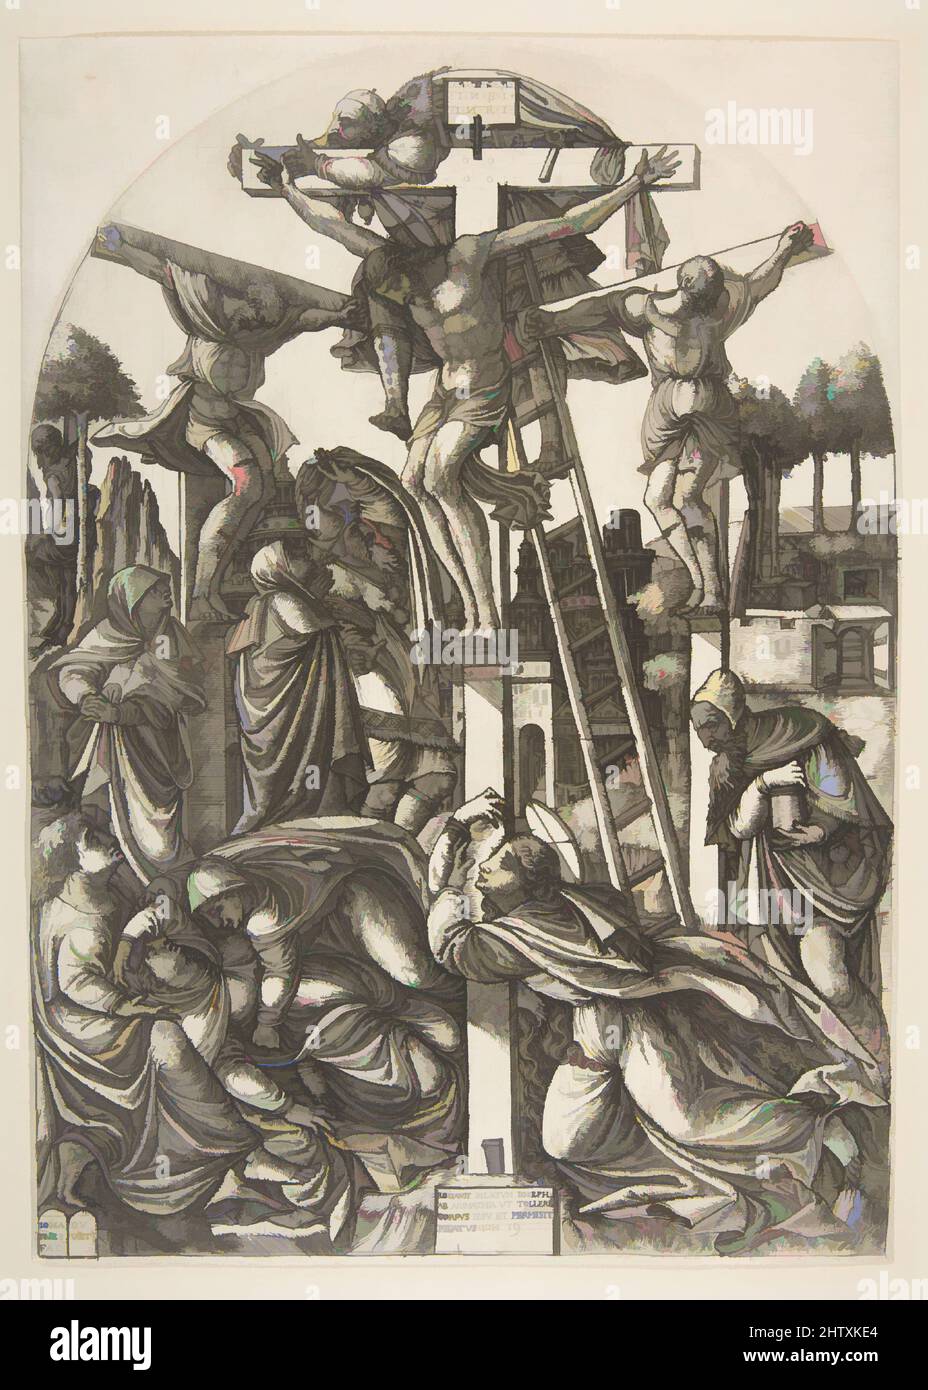 Art inspired by The Deposition, n.d., Engraving, sheet: 11 15/16 x 8 9/16 in. (30.4 x 21.7 cm), Prints, Jean Duvet (French, ca. 1485–after 1561, Classic works modernized by Artotop with a splash of modernity. Shapes, color and value, eye-catching visual impact on art. Emotions through freedom of artworks in a contemporary way. A timeless message pursuing a wildly creative new direction. Artists turning to the digital medium and creating the Artotop NFT Stock Photo